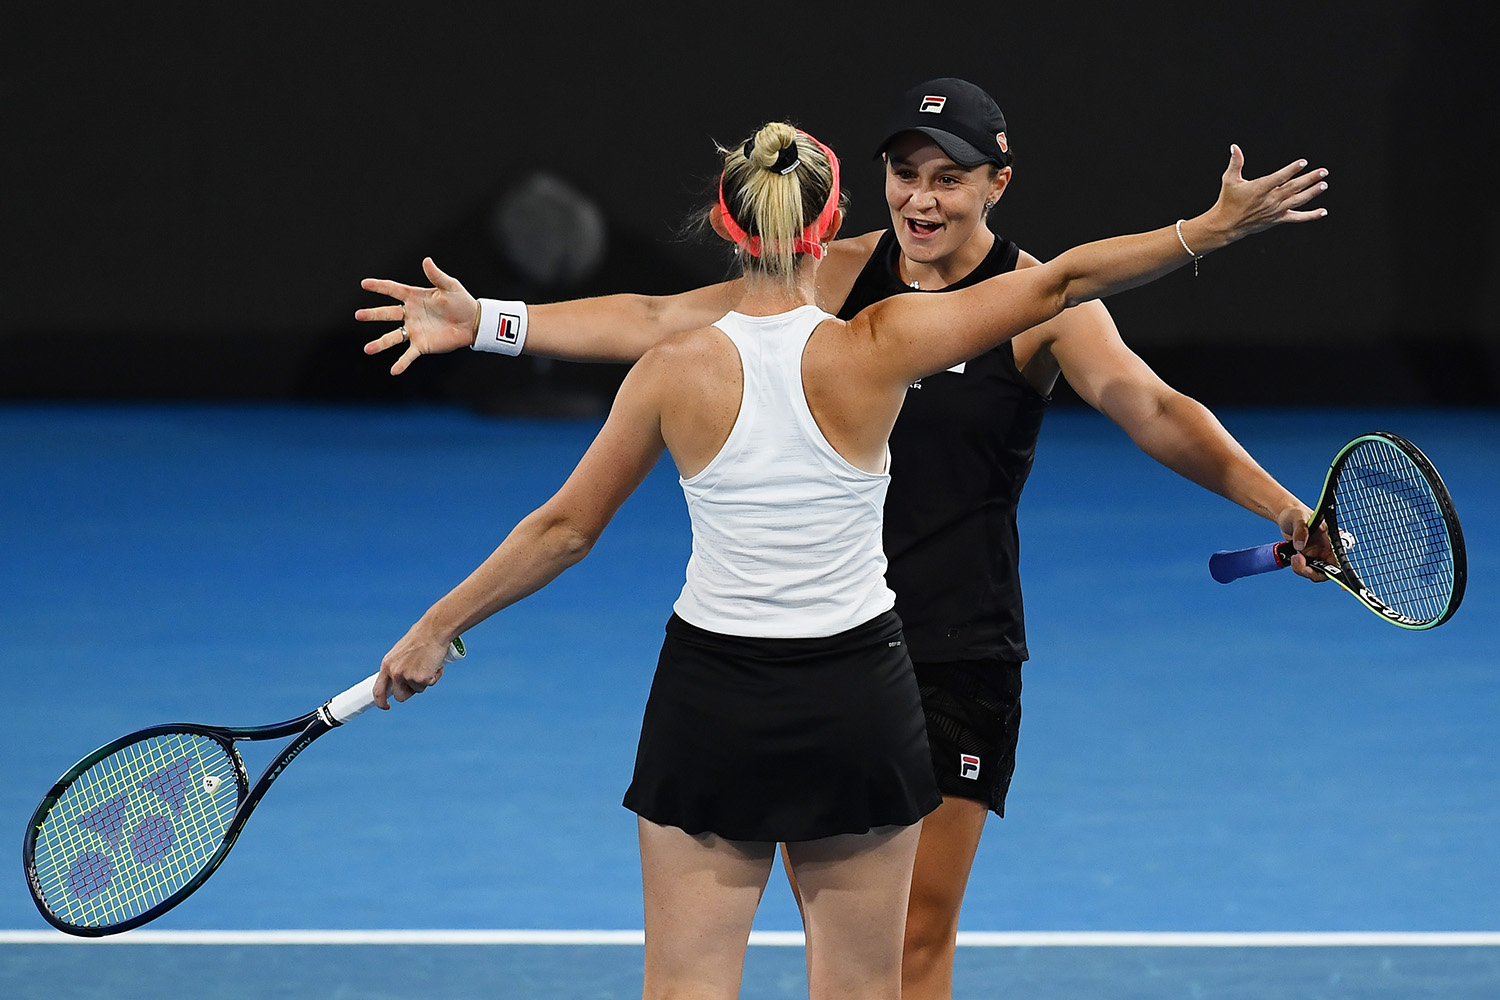 Ash Barty and Storm Sanders win the Adelaide International women's doubles title